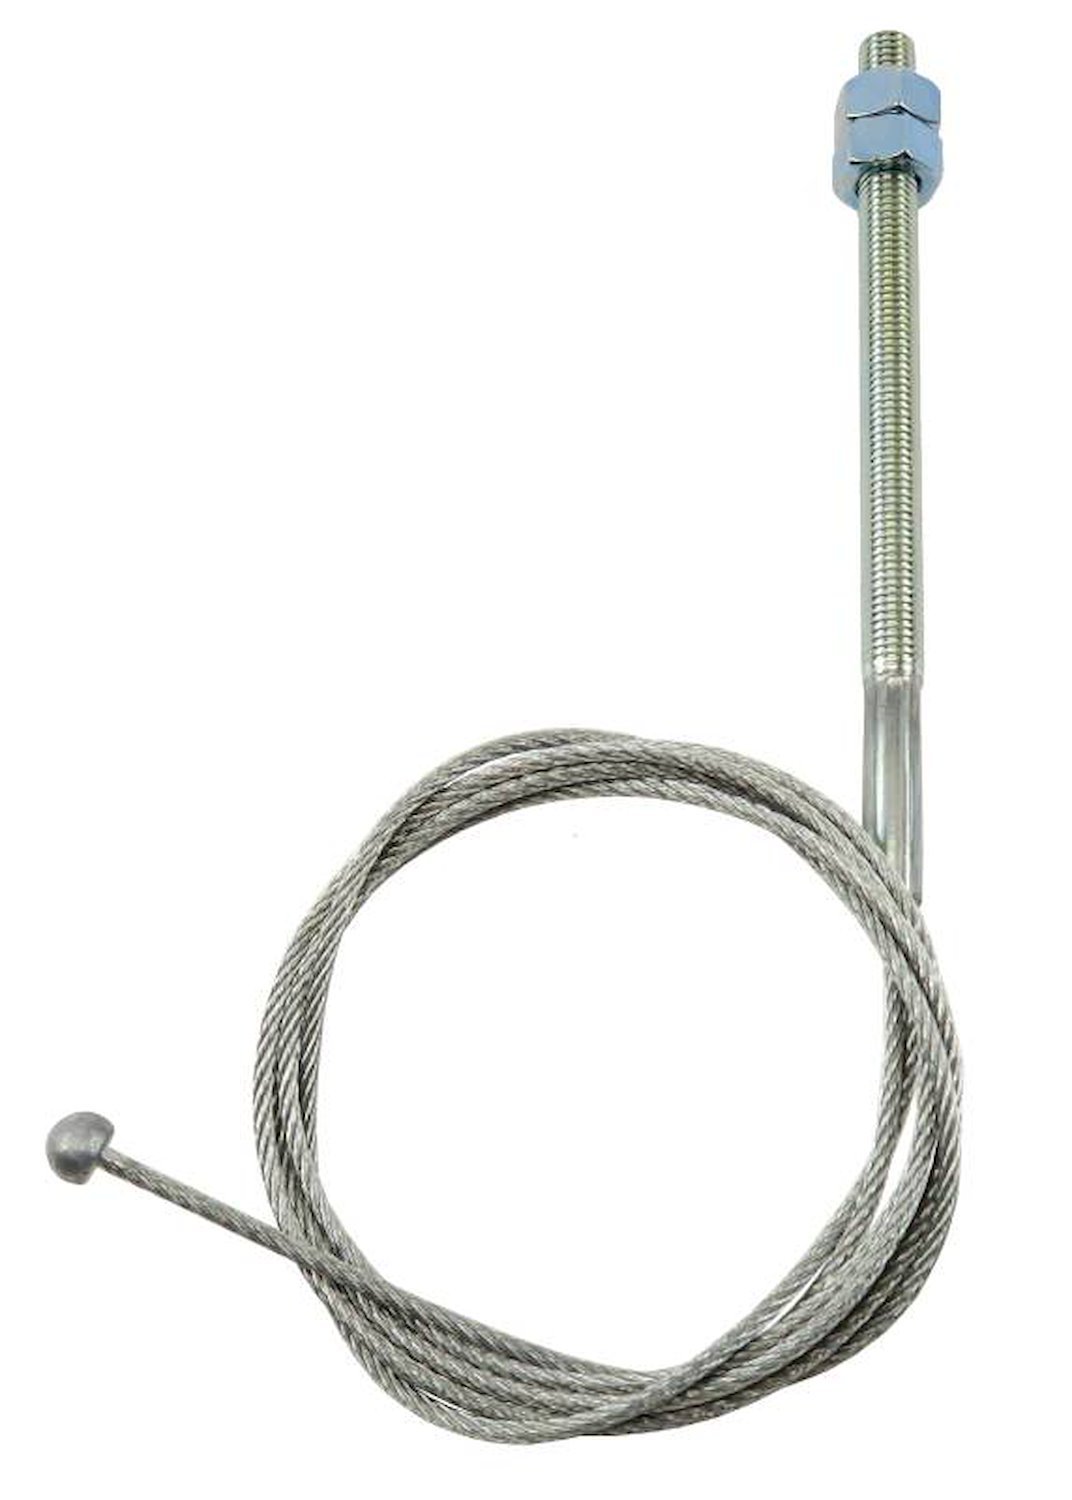 PBC003 1955-1957 Chevrolet Full-Size Front Parking Brake Cable